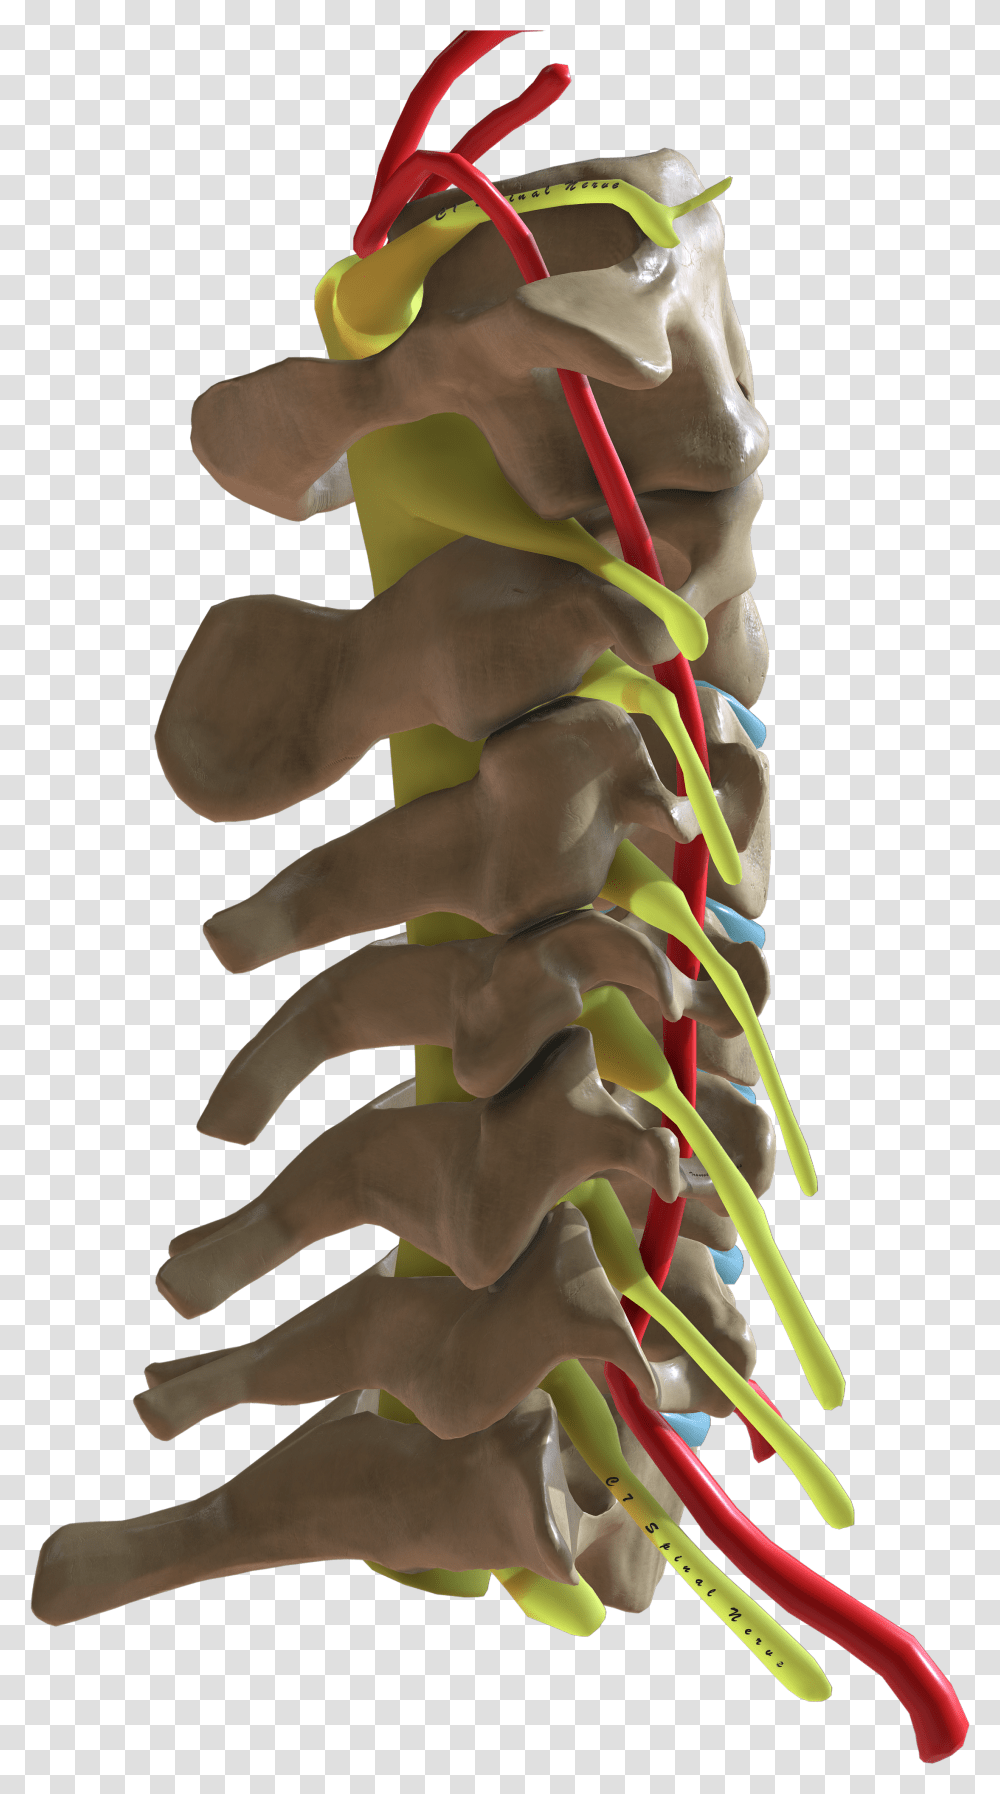 Cervical Spine Lateral View Transparent Png